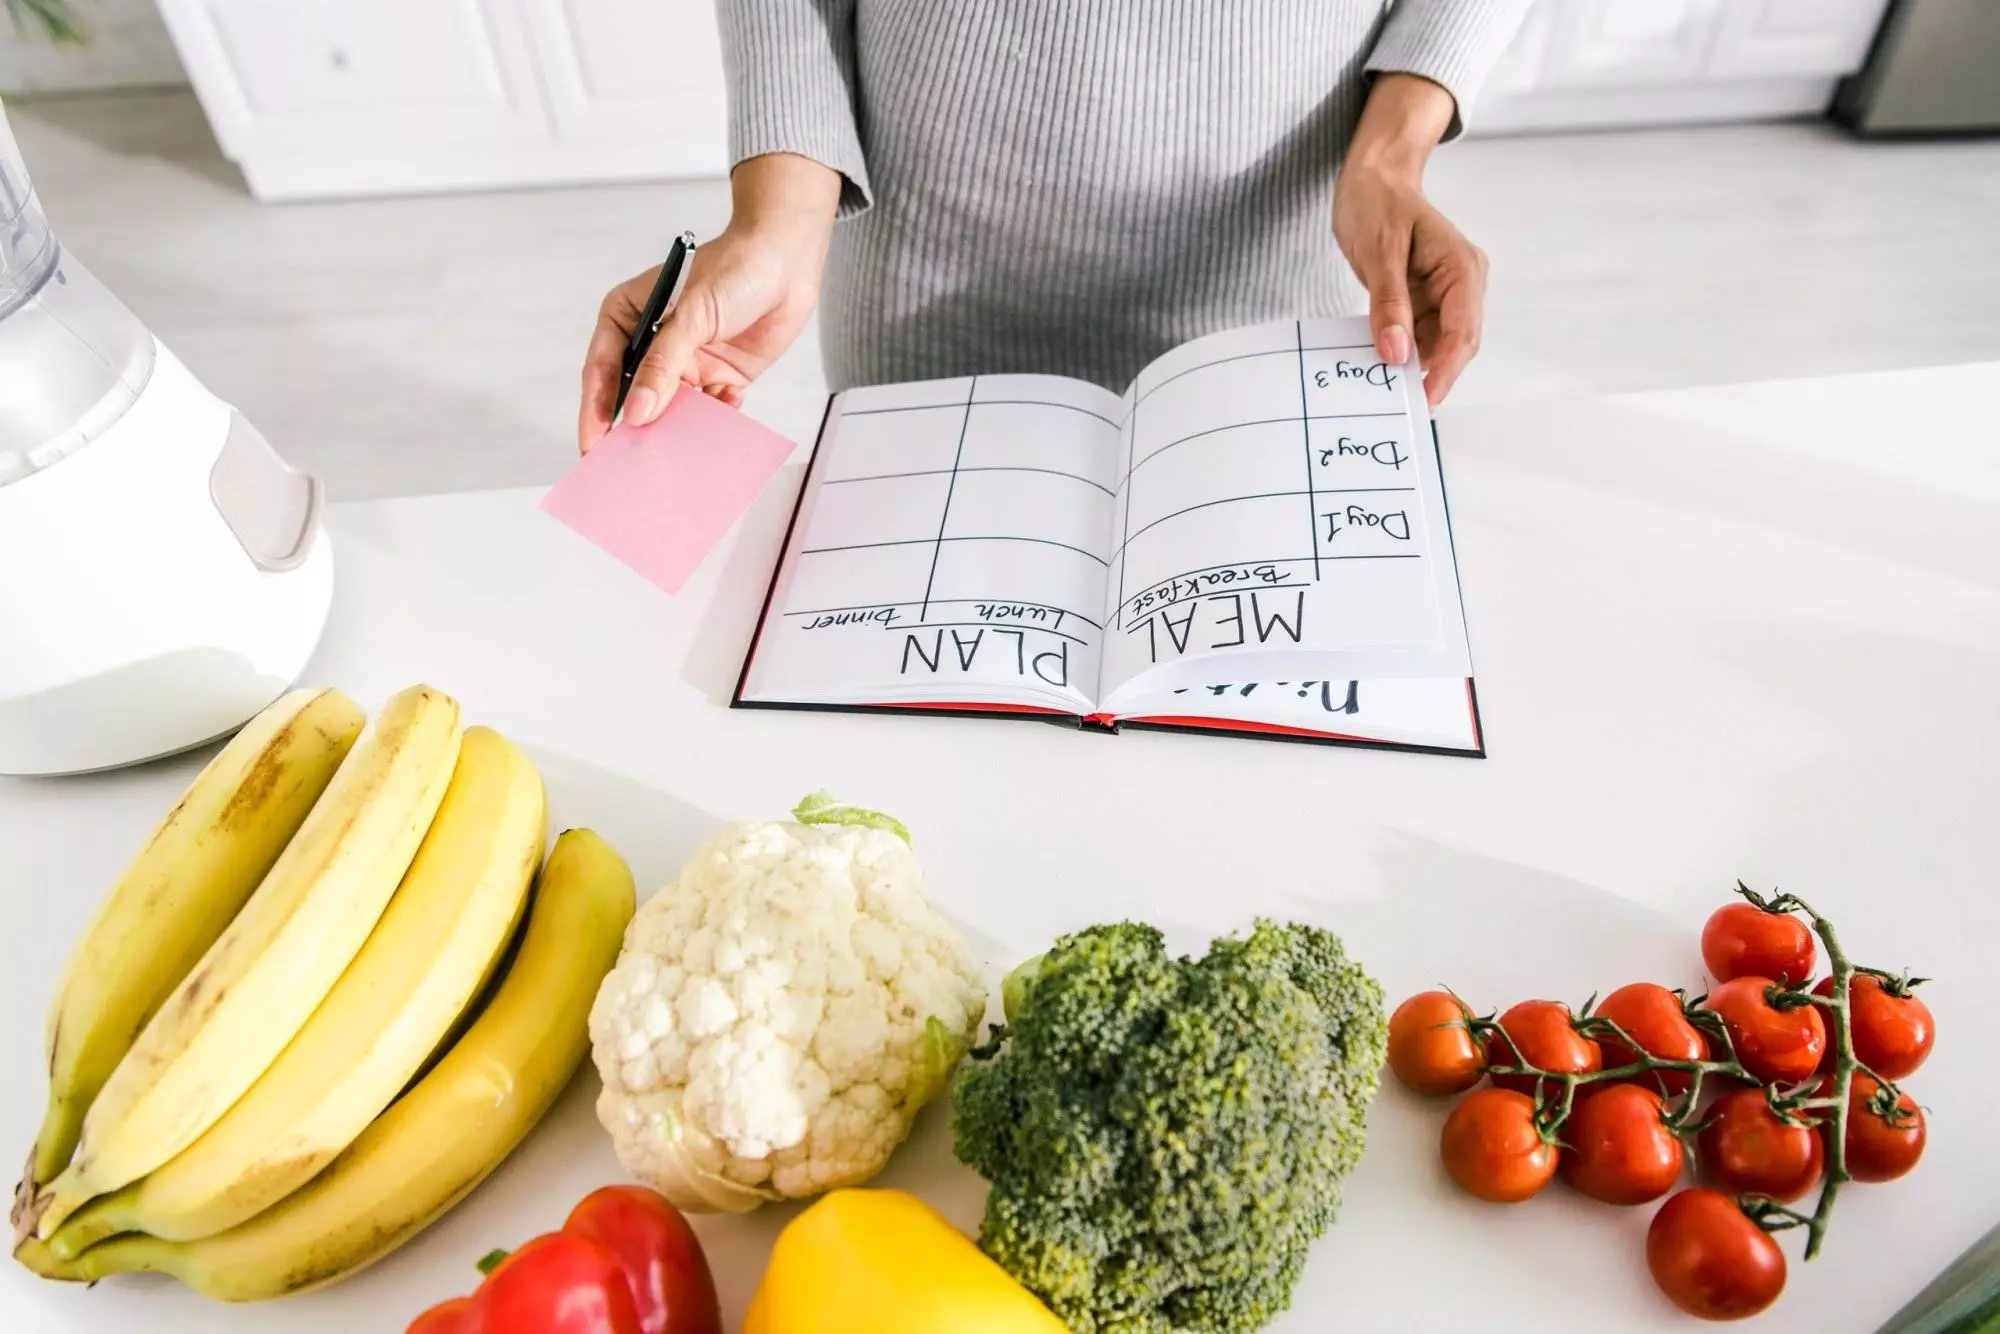 Person planning meals with fresh produce on table.